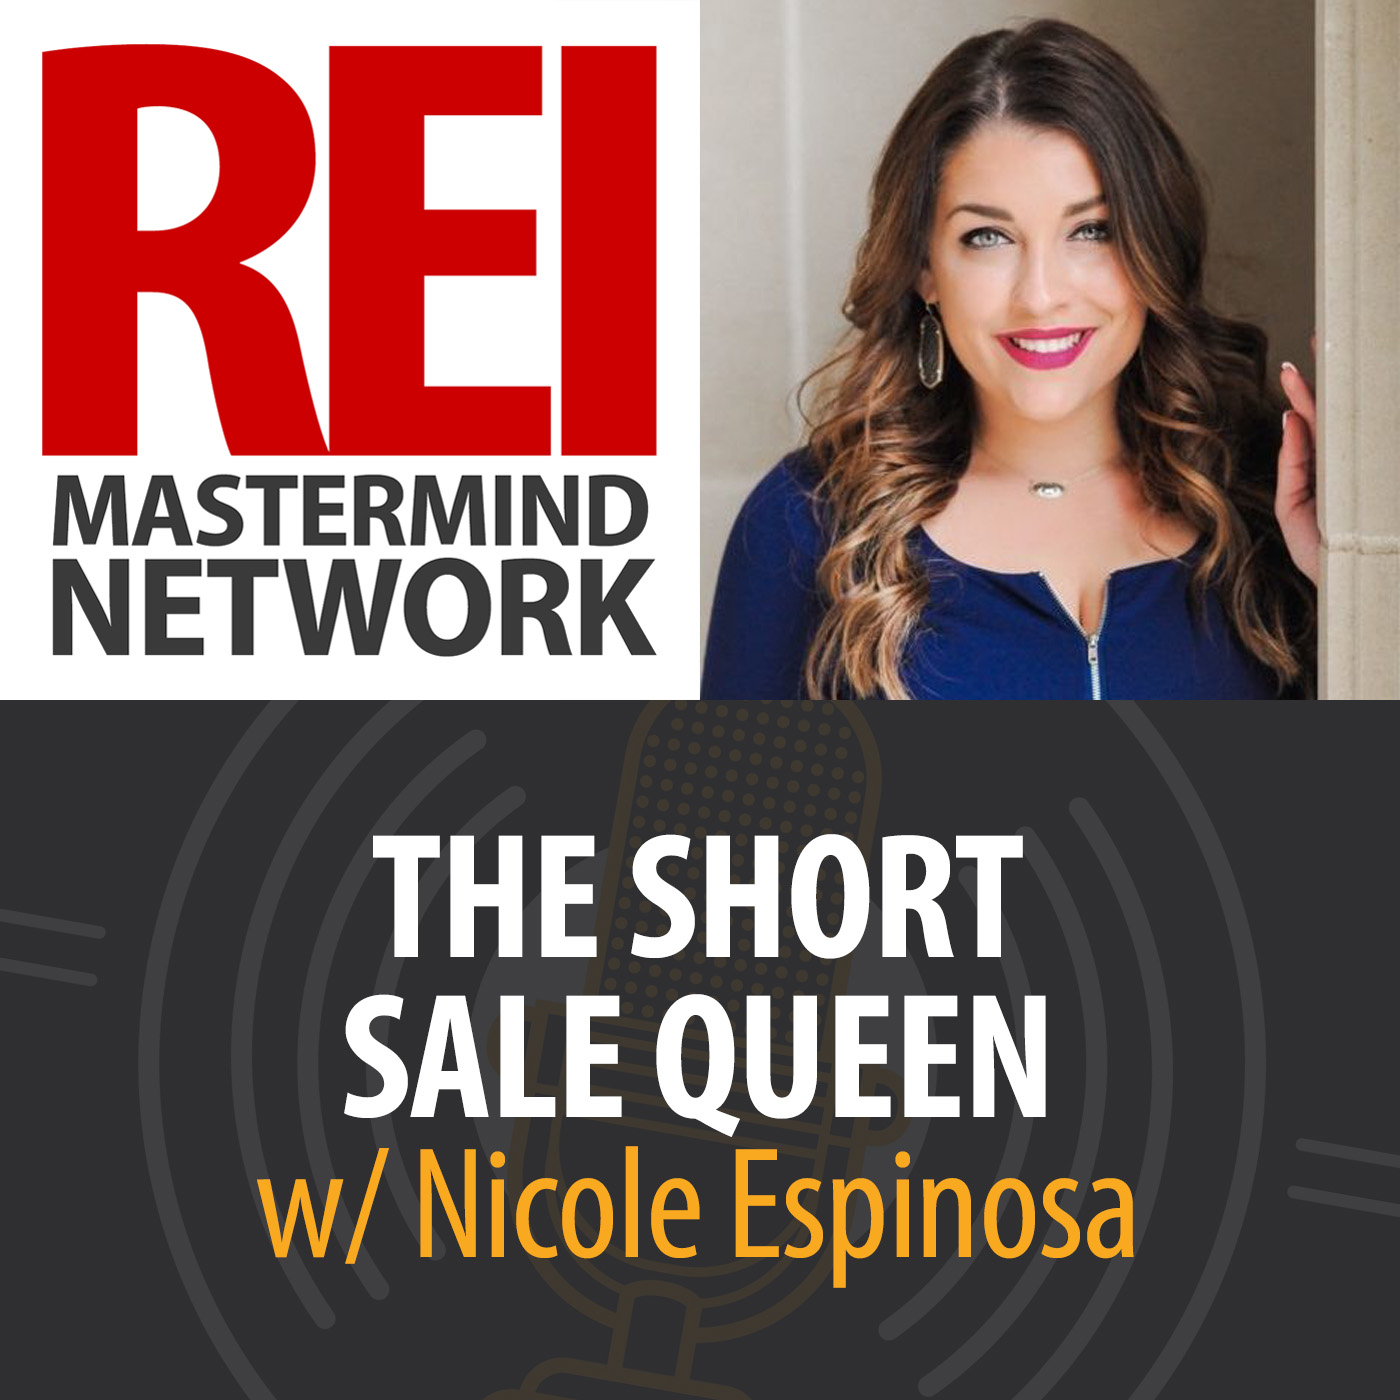 The Short Sale Queen with Nicole Espinosa Image